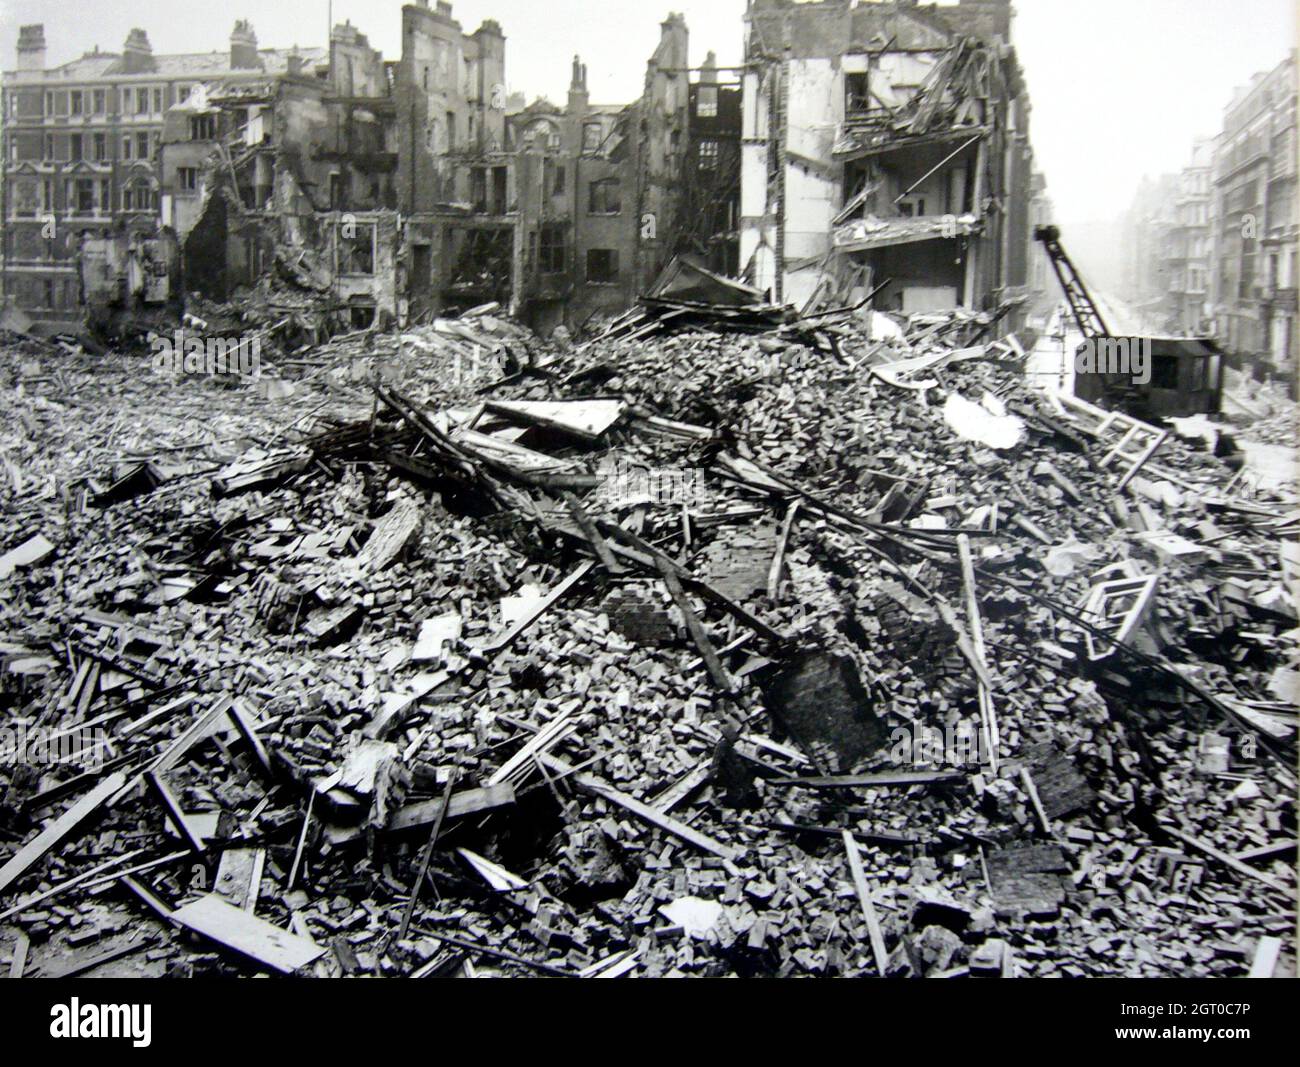 Extensive bomb and blast damage to Hallam Street and Duchess Street during the Blitz, Westminster, London 1940 Stock Photo